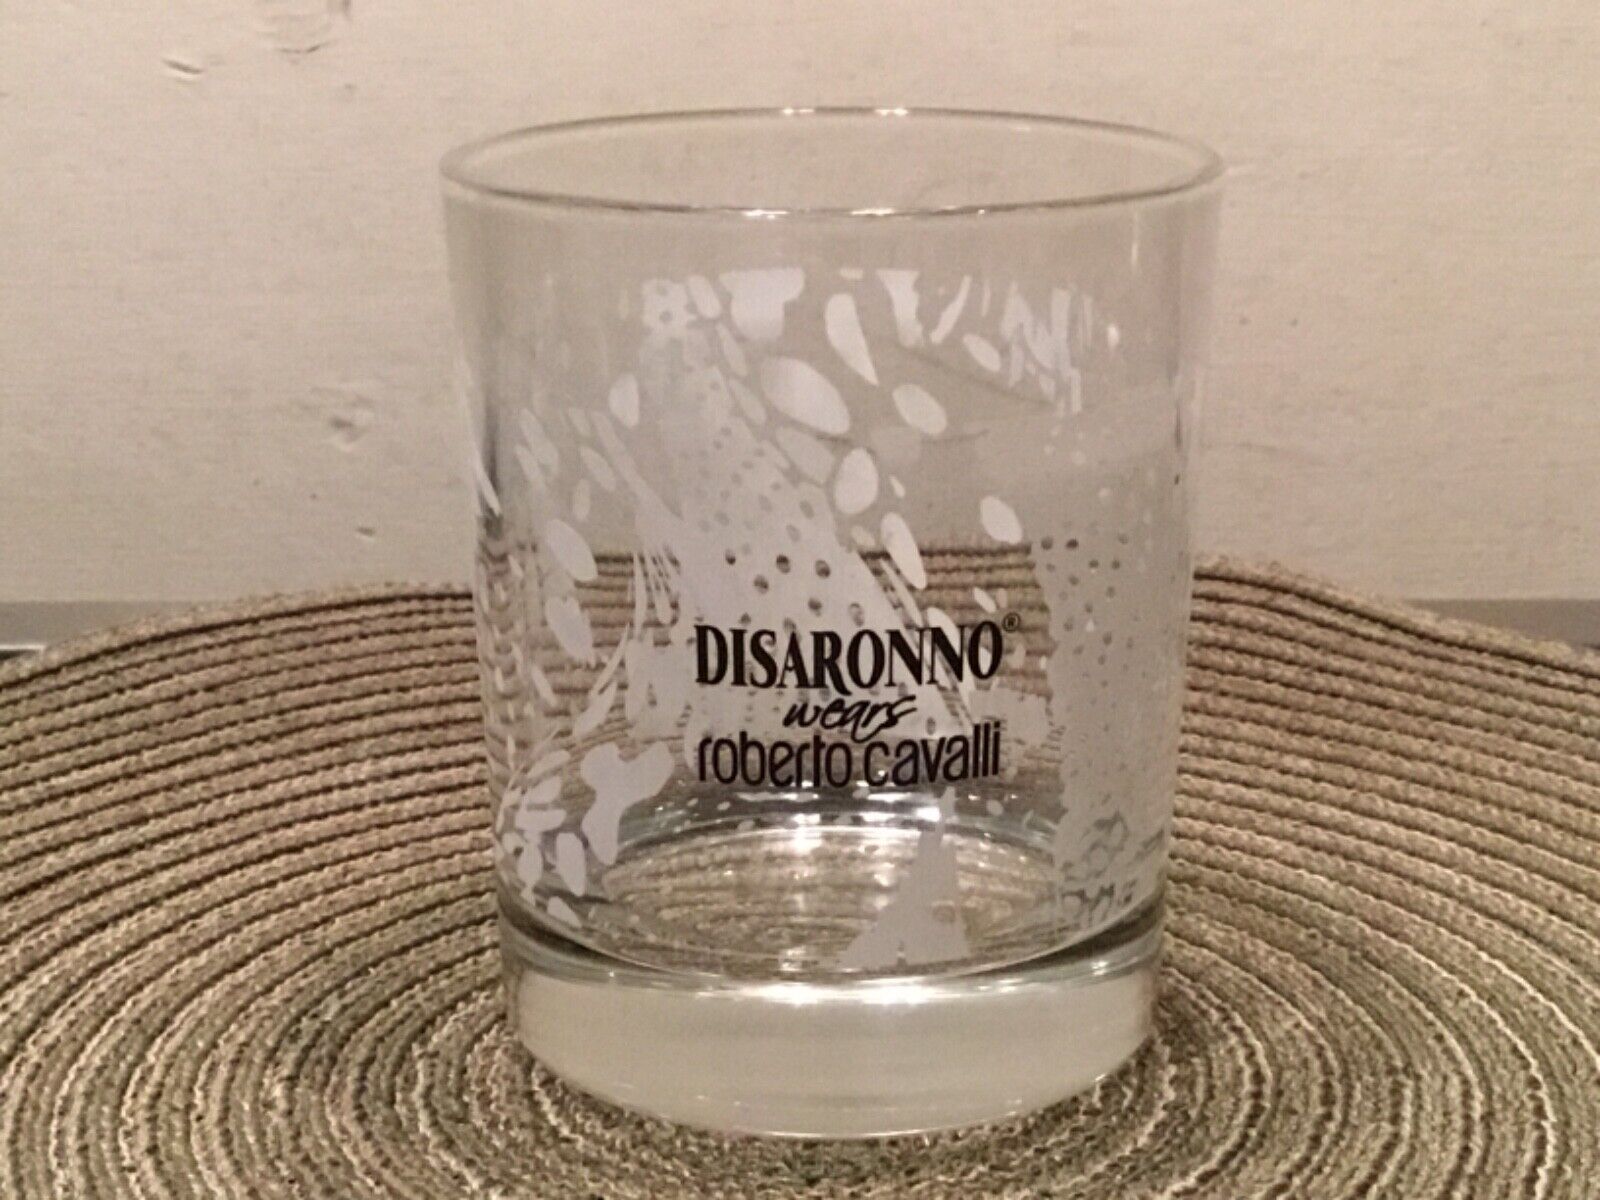 HTF DISARONNO “WEARS ROBERTO CAVALLI” THIS WAS A LIMITED EDITION COCKTAIL GLASS